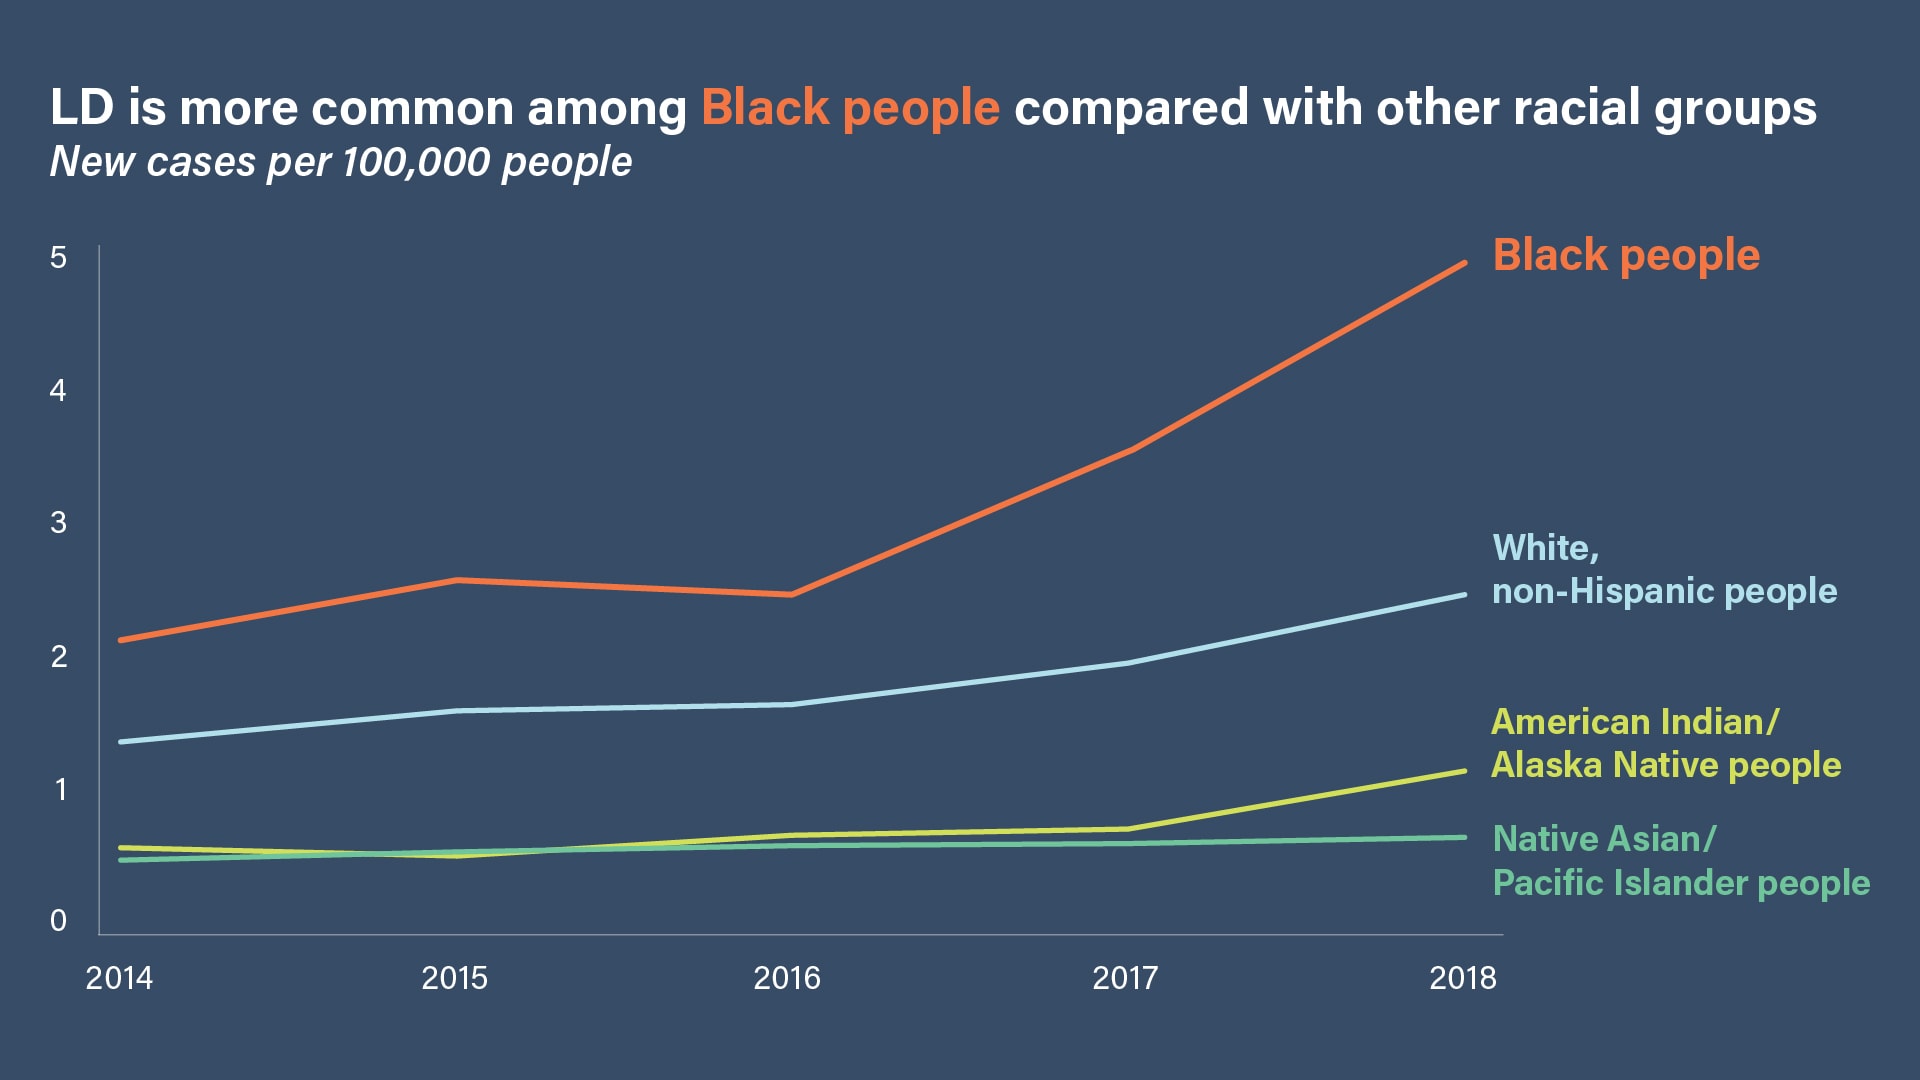 Graph with text "LD is more common among Black people compared with other racial groups (new cases per 100,000). Graphic shows trend lines for Black people, White non-Hispanic people, American Indian/Alaska Native people and Native Asian/Pacific Islander people. The line for Black people is highest and going up faster than other groups.